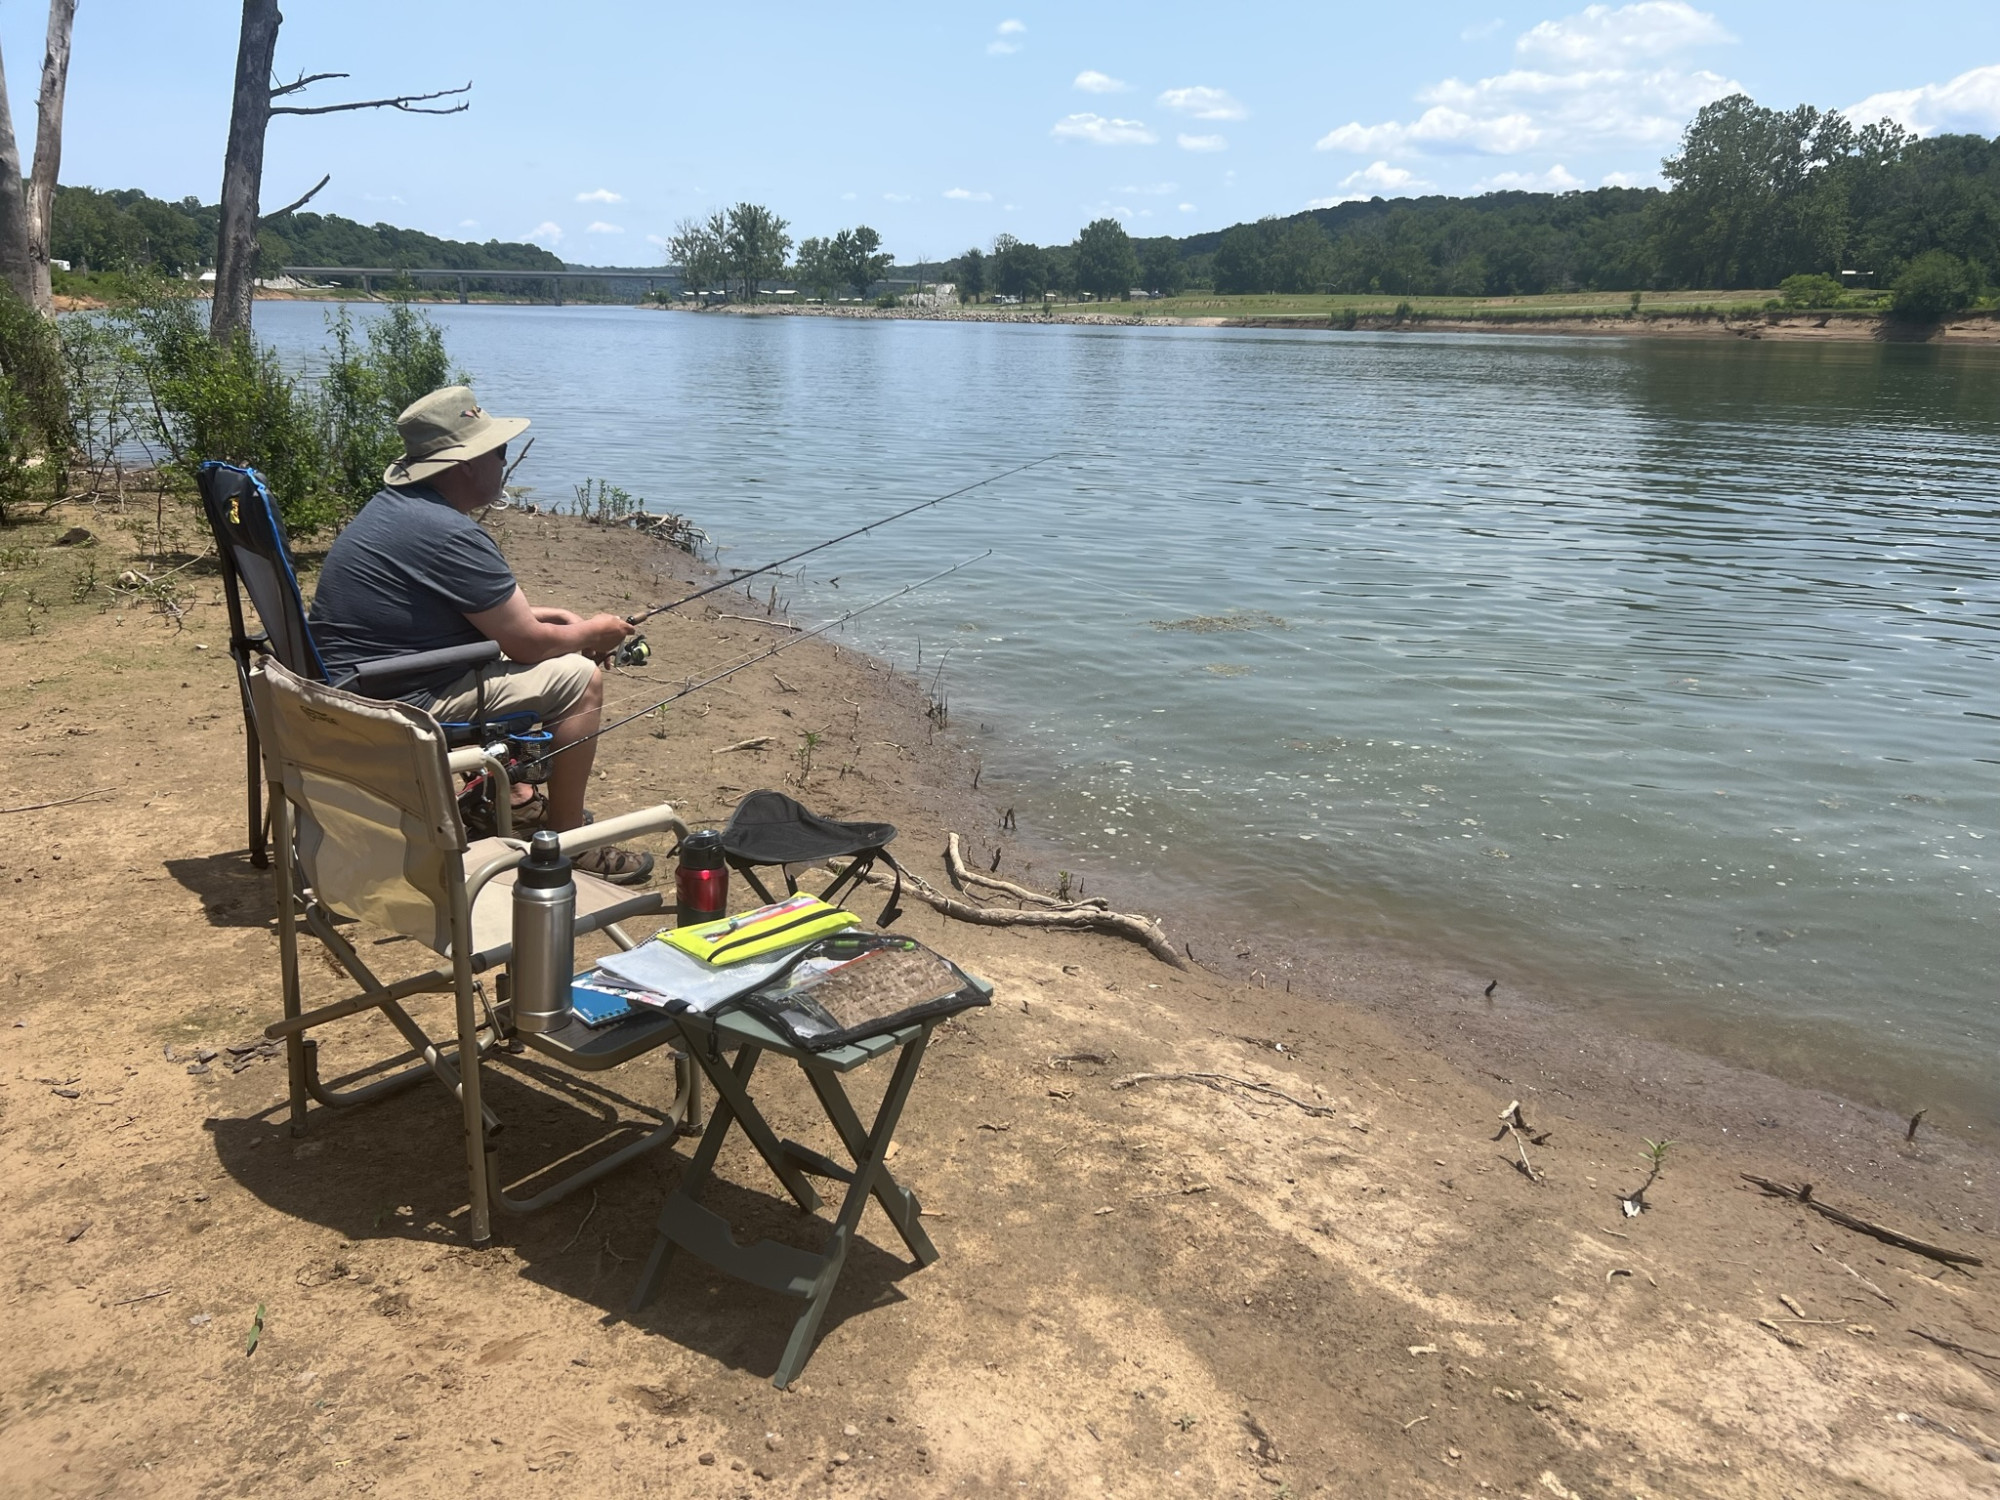 Sitting on the bank of Bulls Shoales lake, Missouri, in our chairs with fishing rods, journals, and beverages.